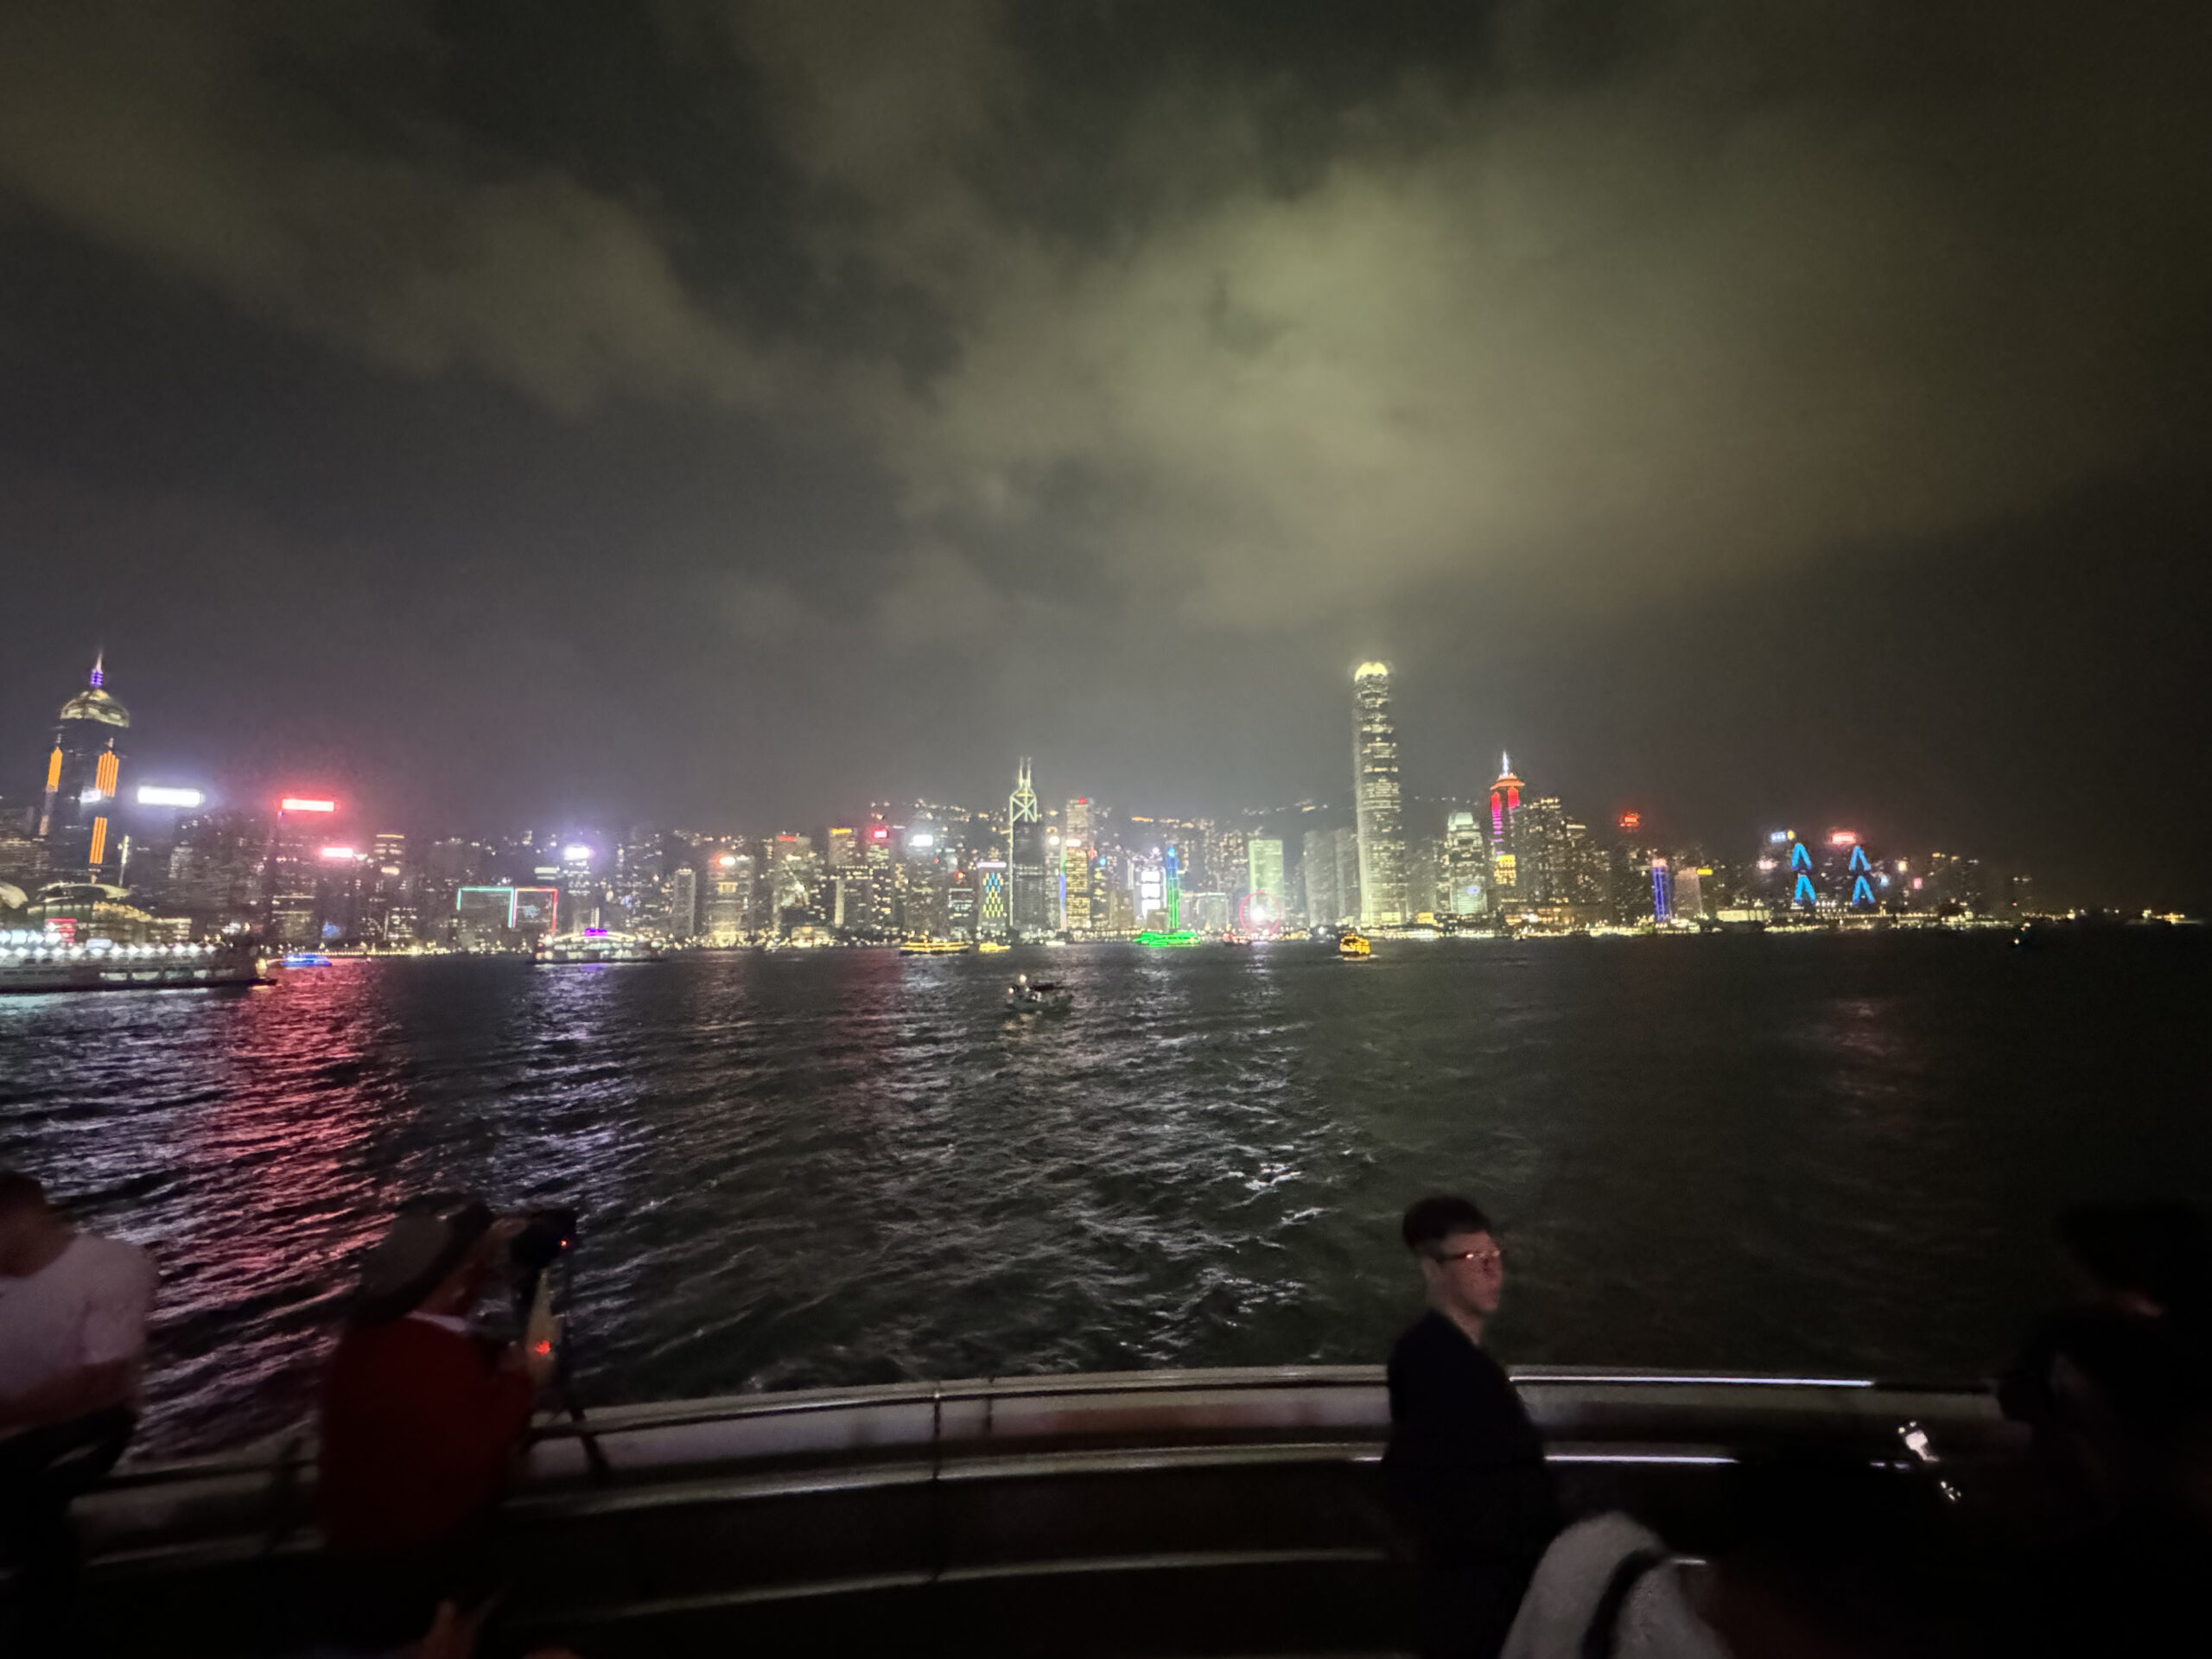 Hong Kong skyline at night during the Symphony of Lights as seen from Kowloon